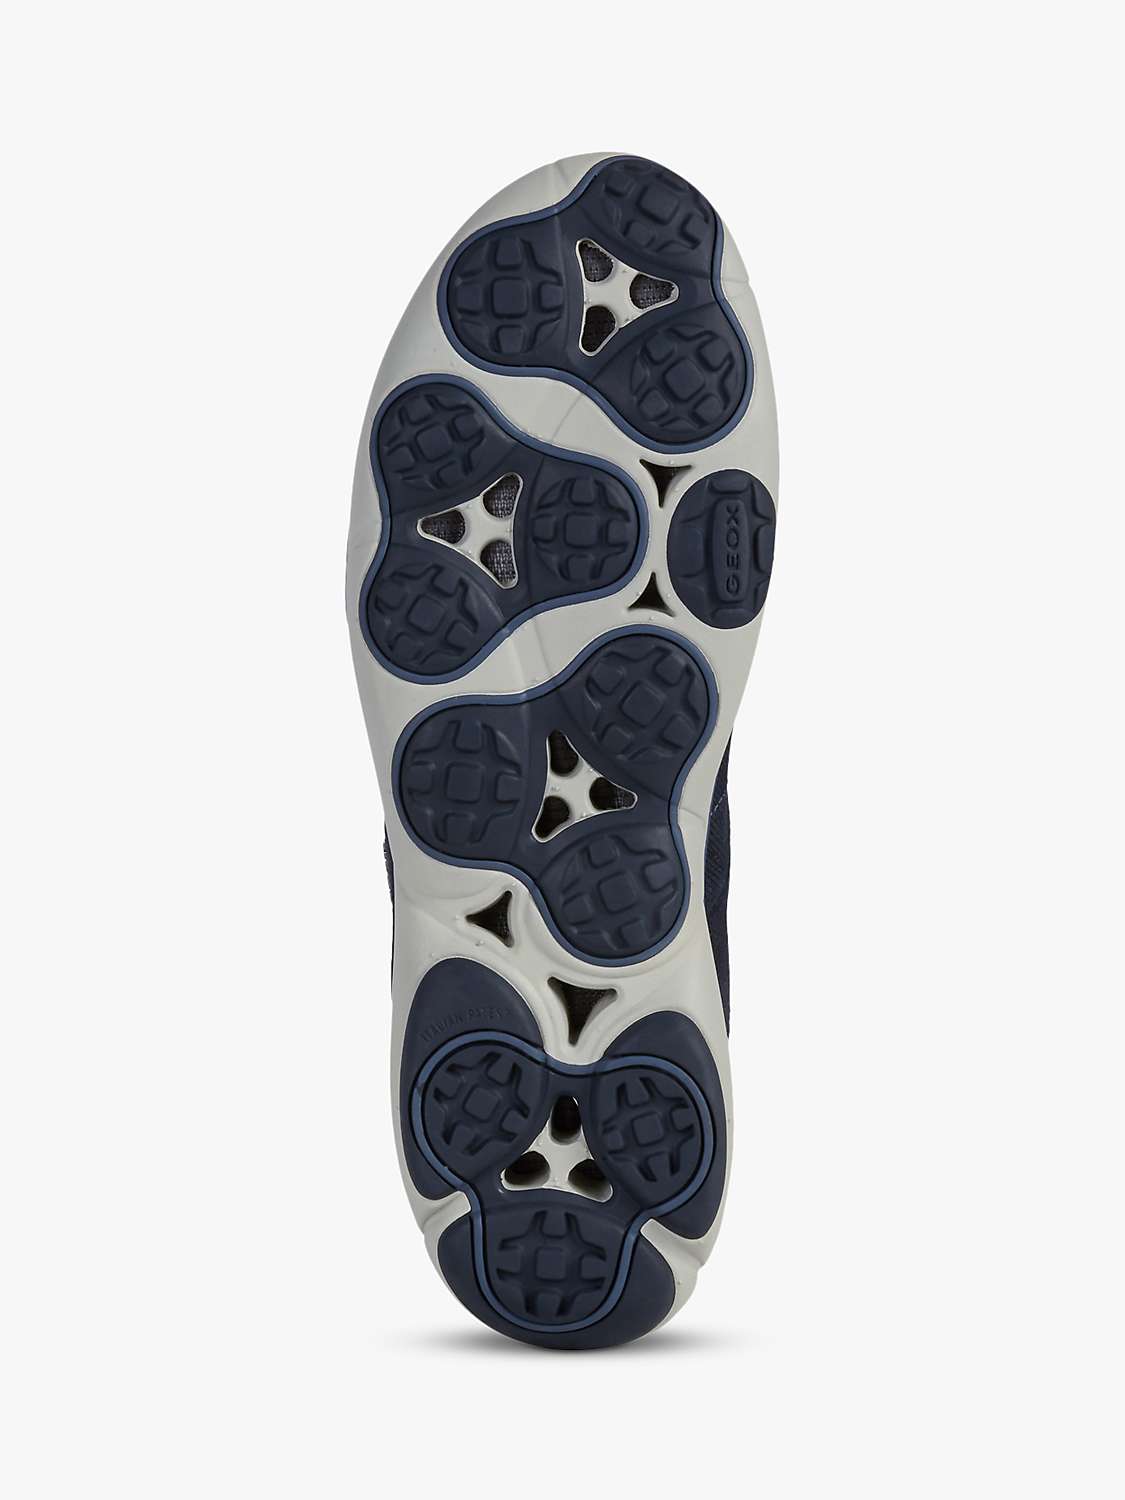 Buy Geox Nebula Breathable Trainers, Navy Online at johnlewis.com